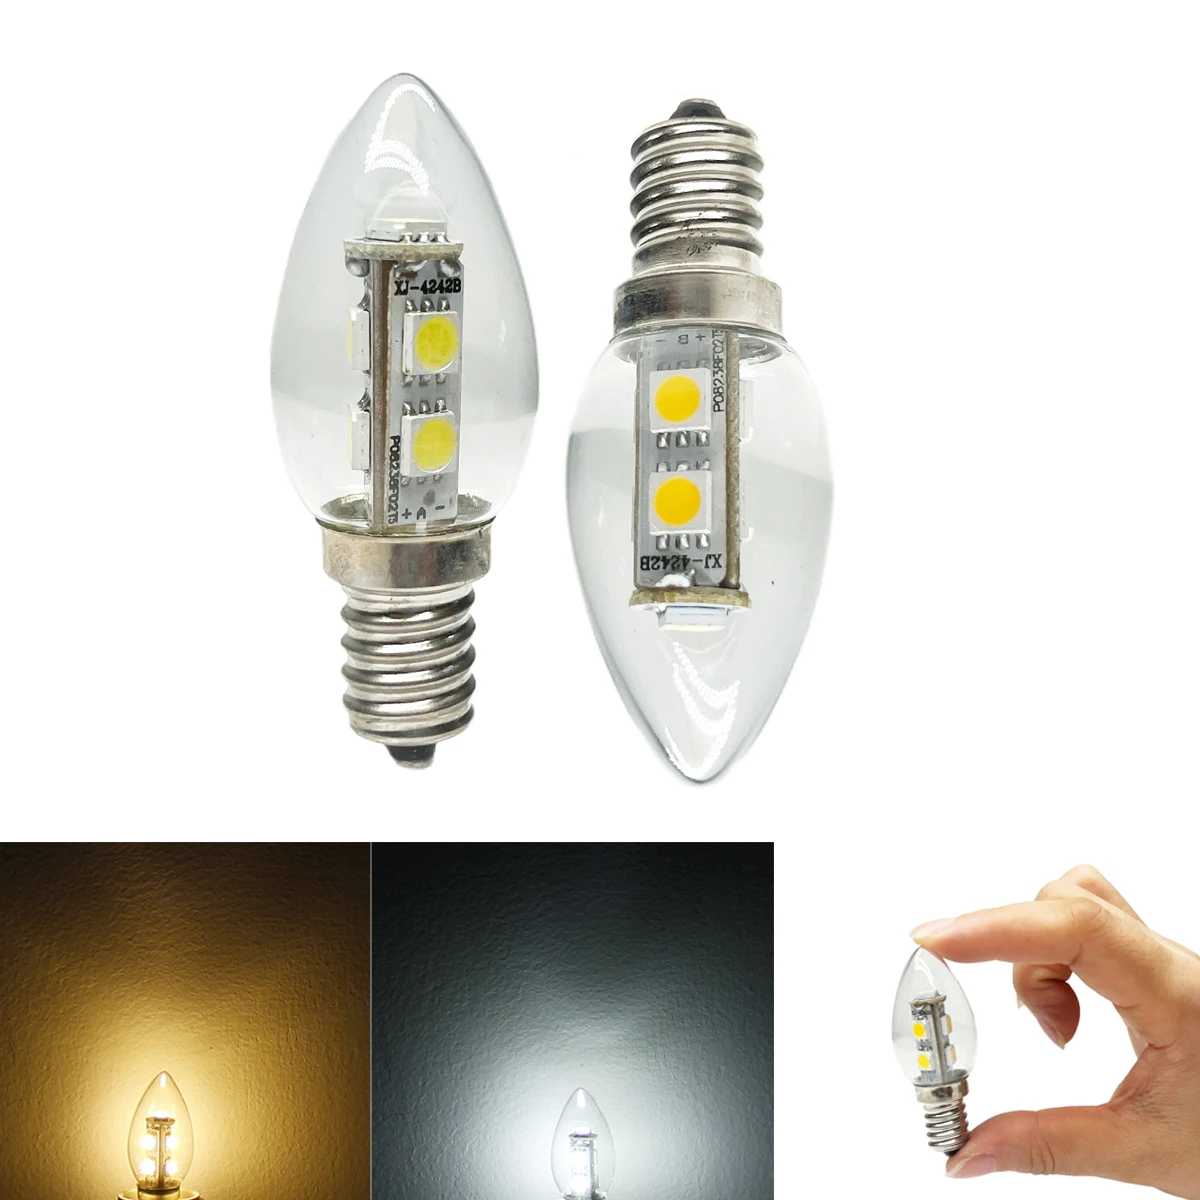 E12 LED Candelabra Candle Light Bulb 1W 5050 SMD Glass Shell Cold Warm White 15W Halogen Lamp Replacement For Chandelier Decor ganriland led night light bulbs c7 0 5w vintage soft warm 2700k e12 e14 220v dimmable candelabra mini gold tint glass lamp bulb